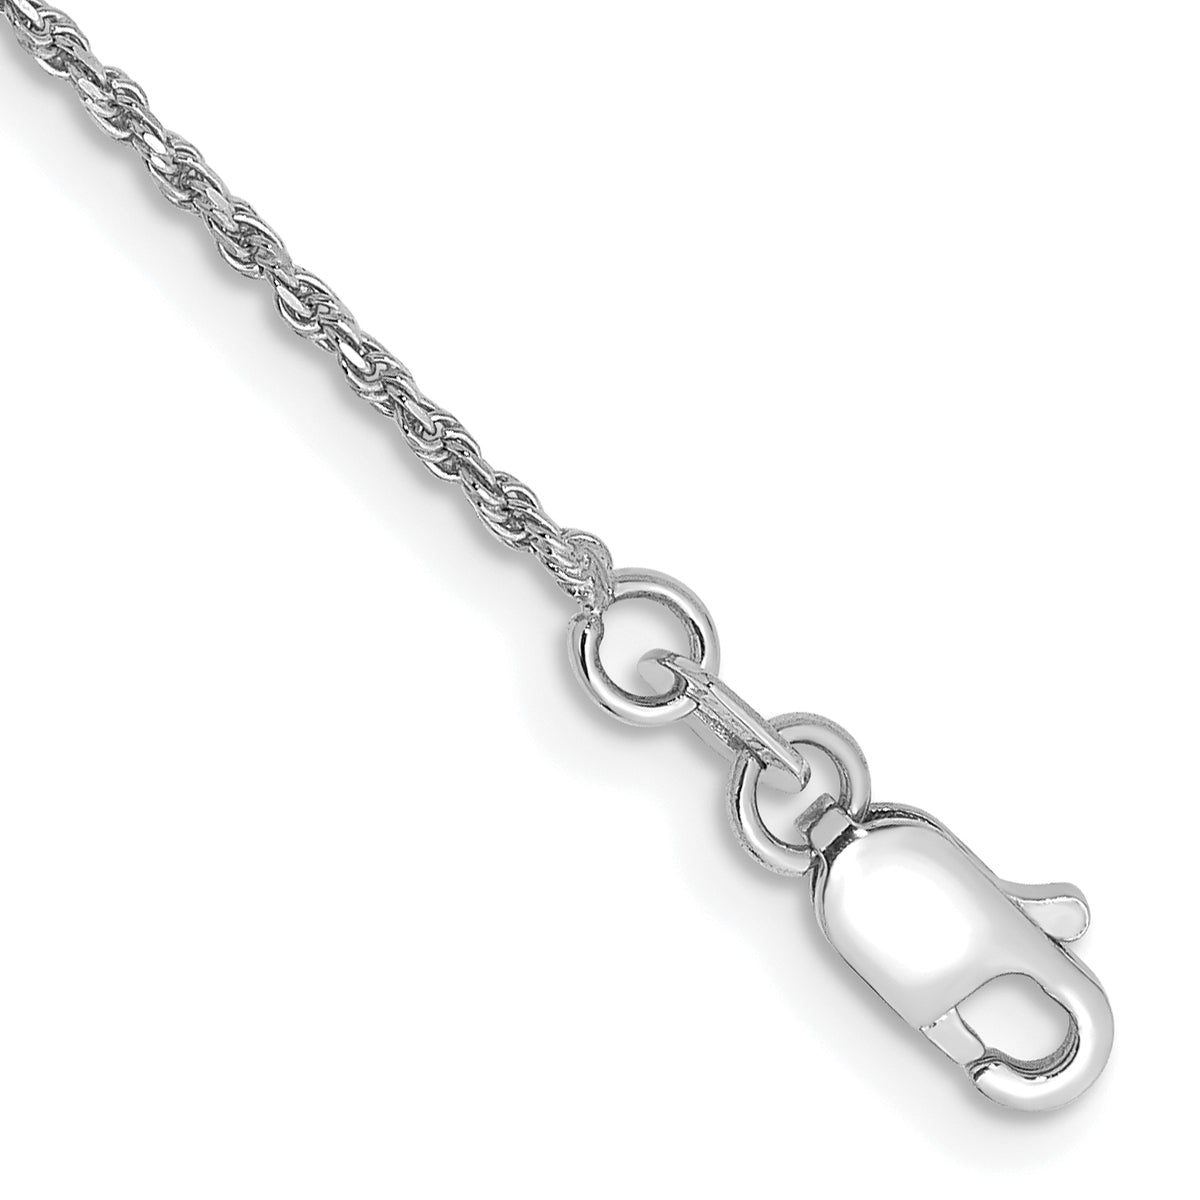 14K White Gold 10 inch 1.15mm Diamond-cut Machine Made Rope with Lobster Clasp Chain Anklet